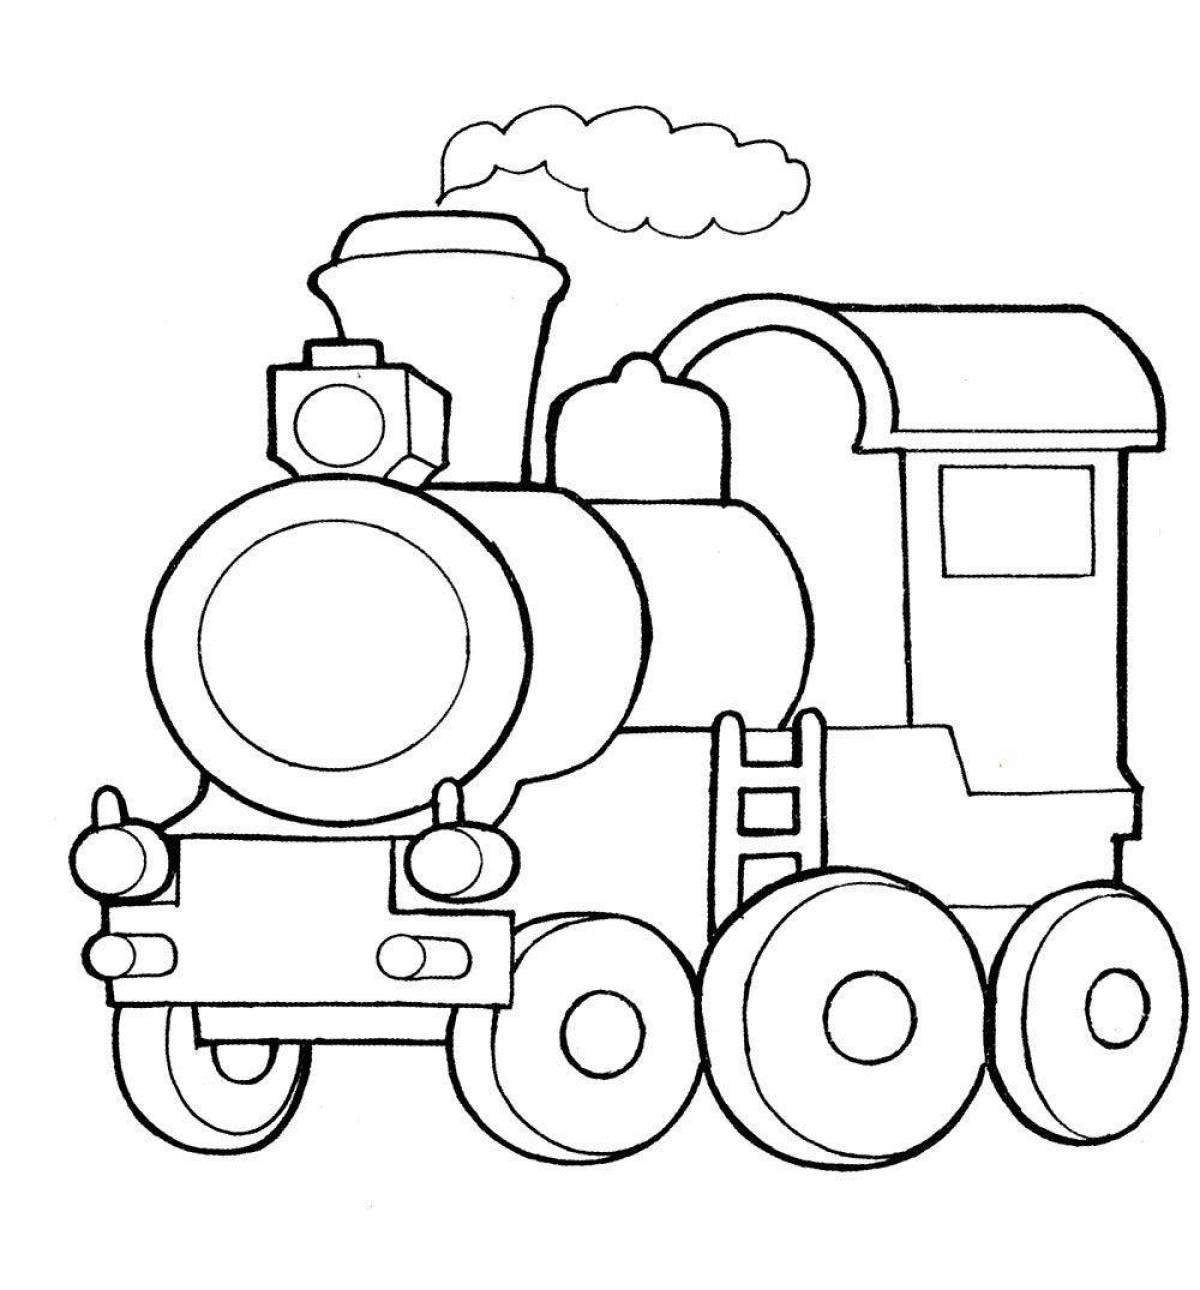 Fancy transport coloring book for 4-5 year olds